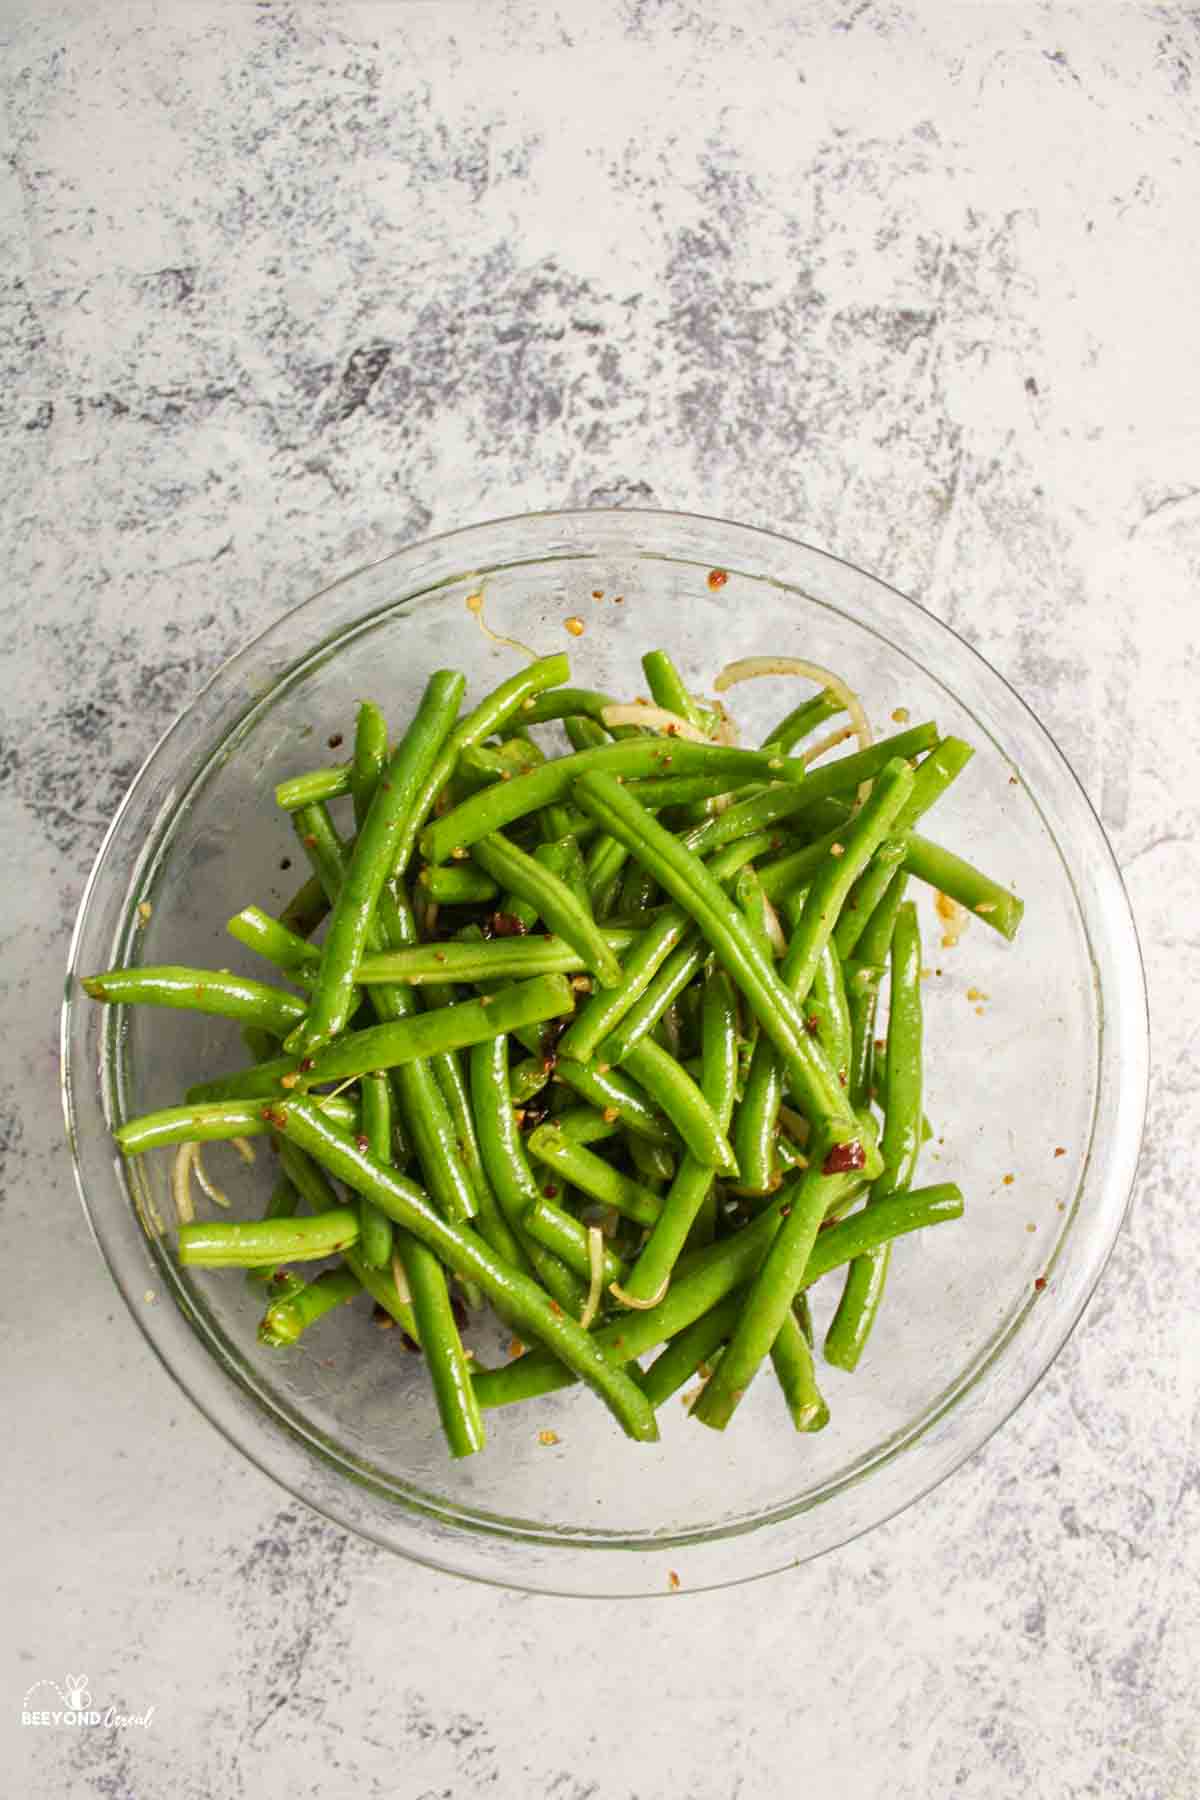 green beans added to mixing bowl filled with italian flavored ingredients